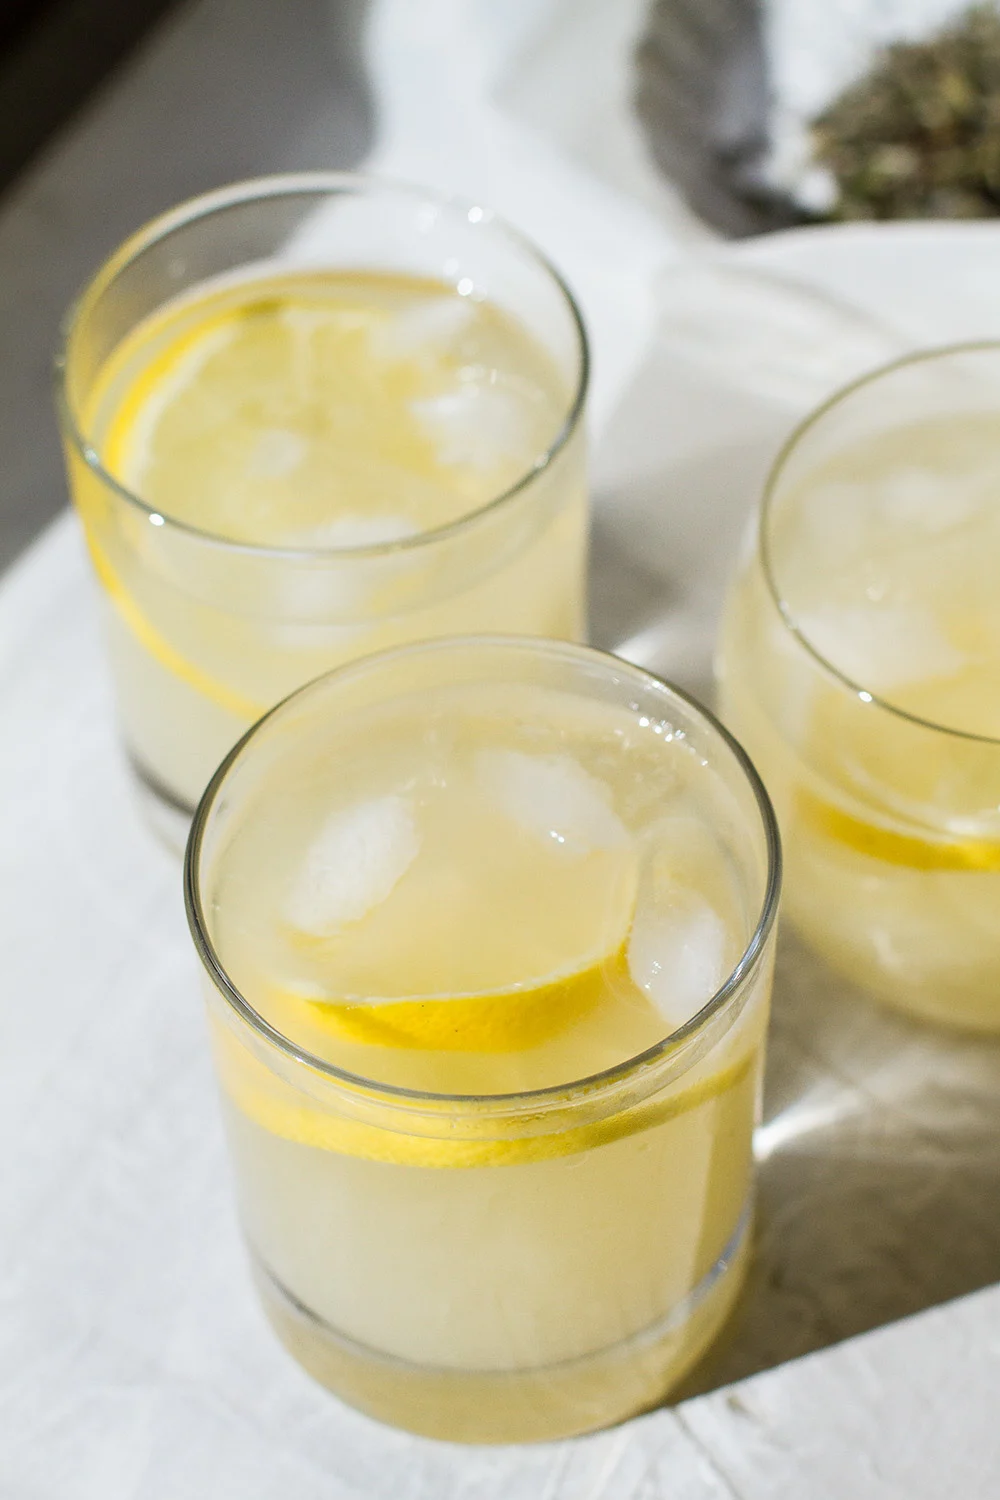 Three glasses with a yellow colored drink and lemon slices.